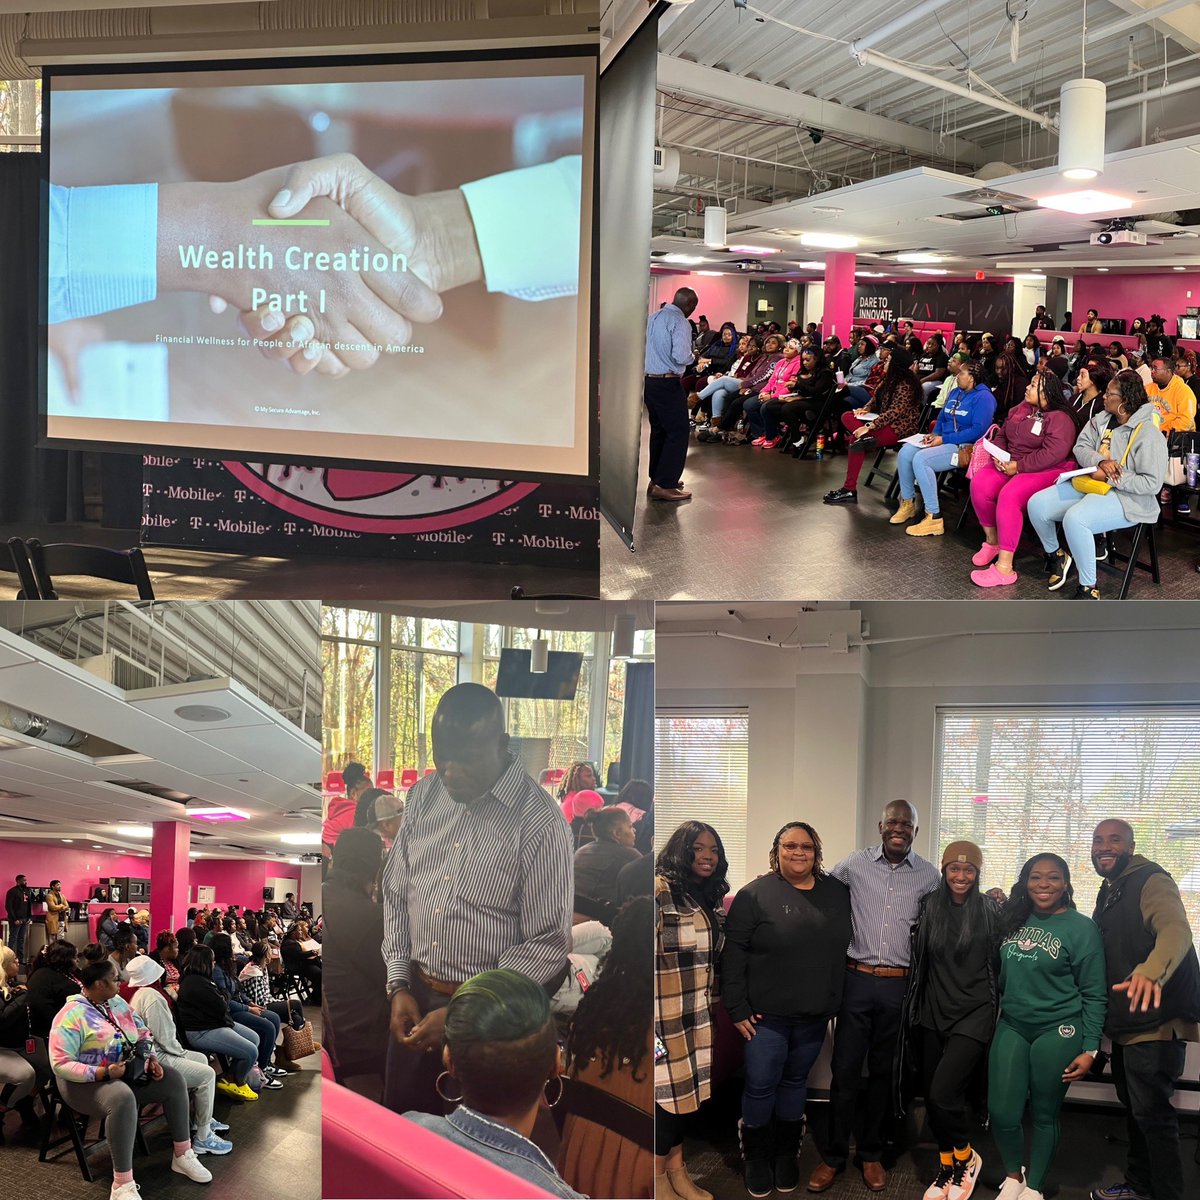 BPW in Alabama because we work for the best company @TMobile .We invest in our employees in many ways. Today our My Secure Advantage guest speaker spoke about financial wellness for African Americans. So many nuggets! @csandoval111 @m_wan4life @tmoorehutch4 @m_ravonnia @KEOdaTKO